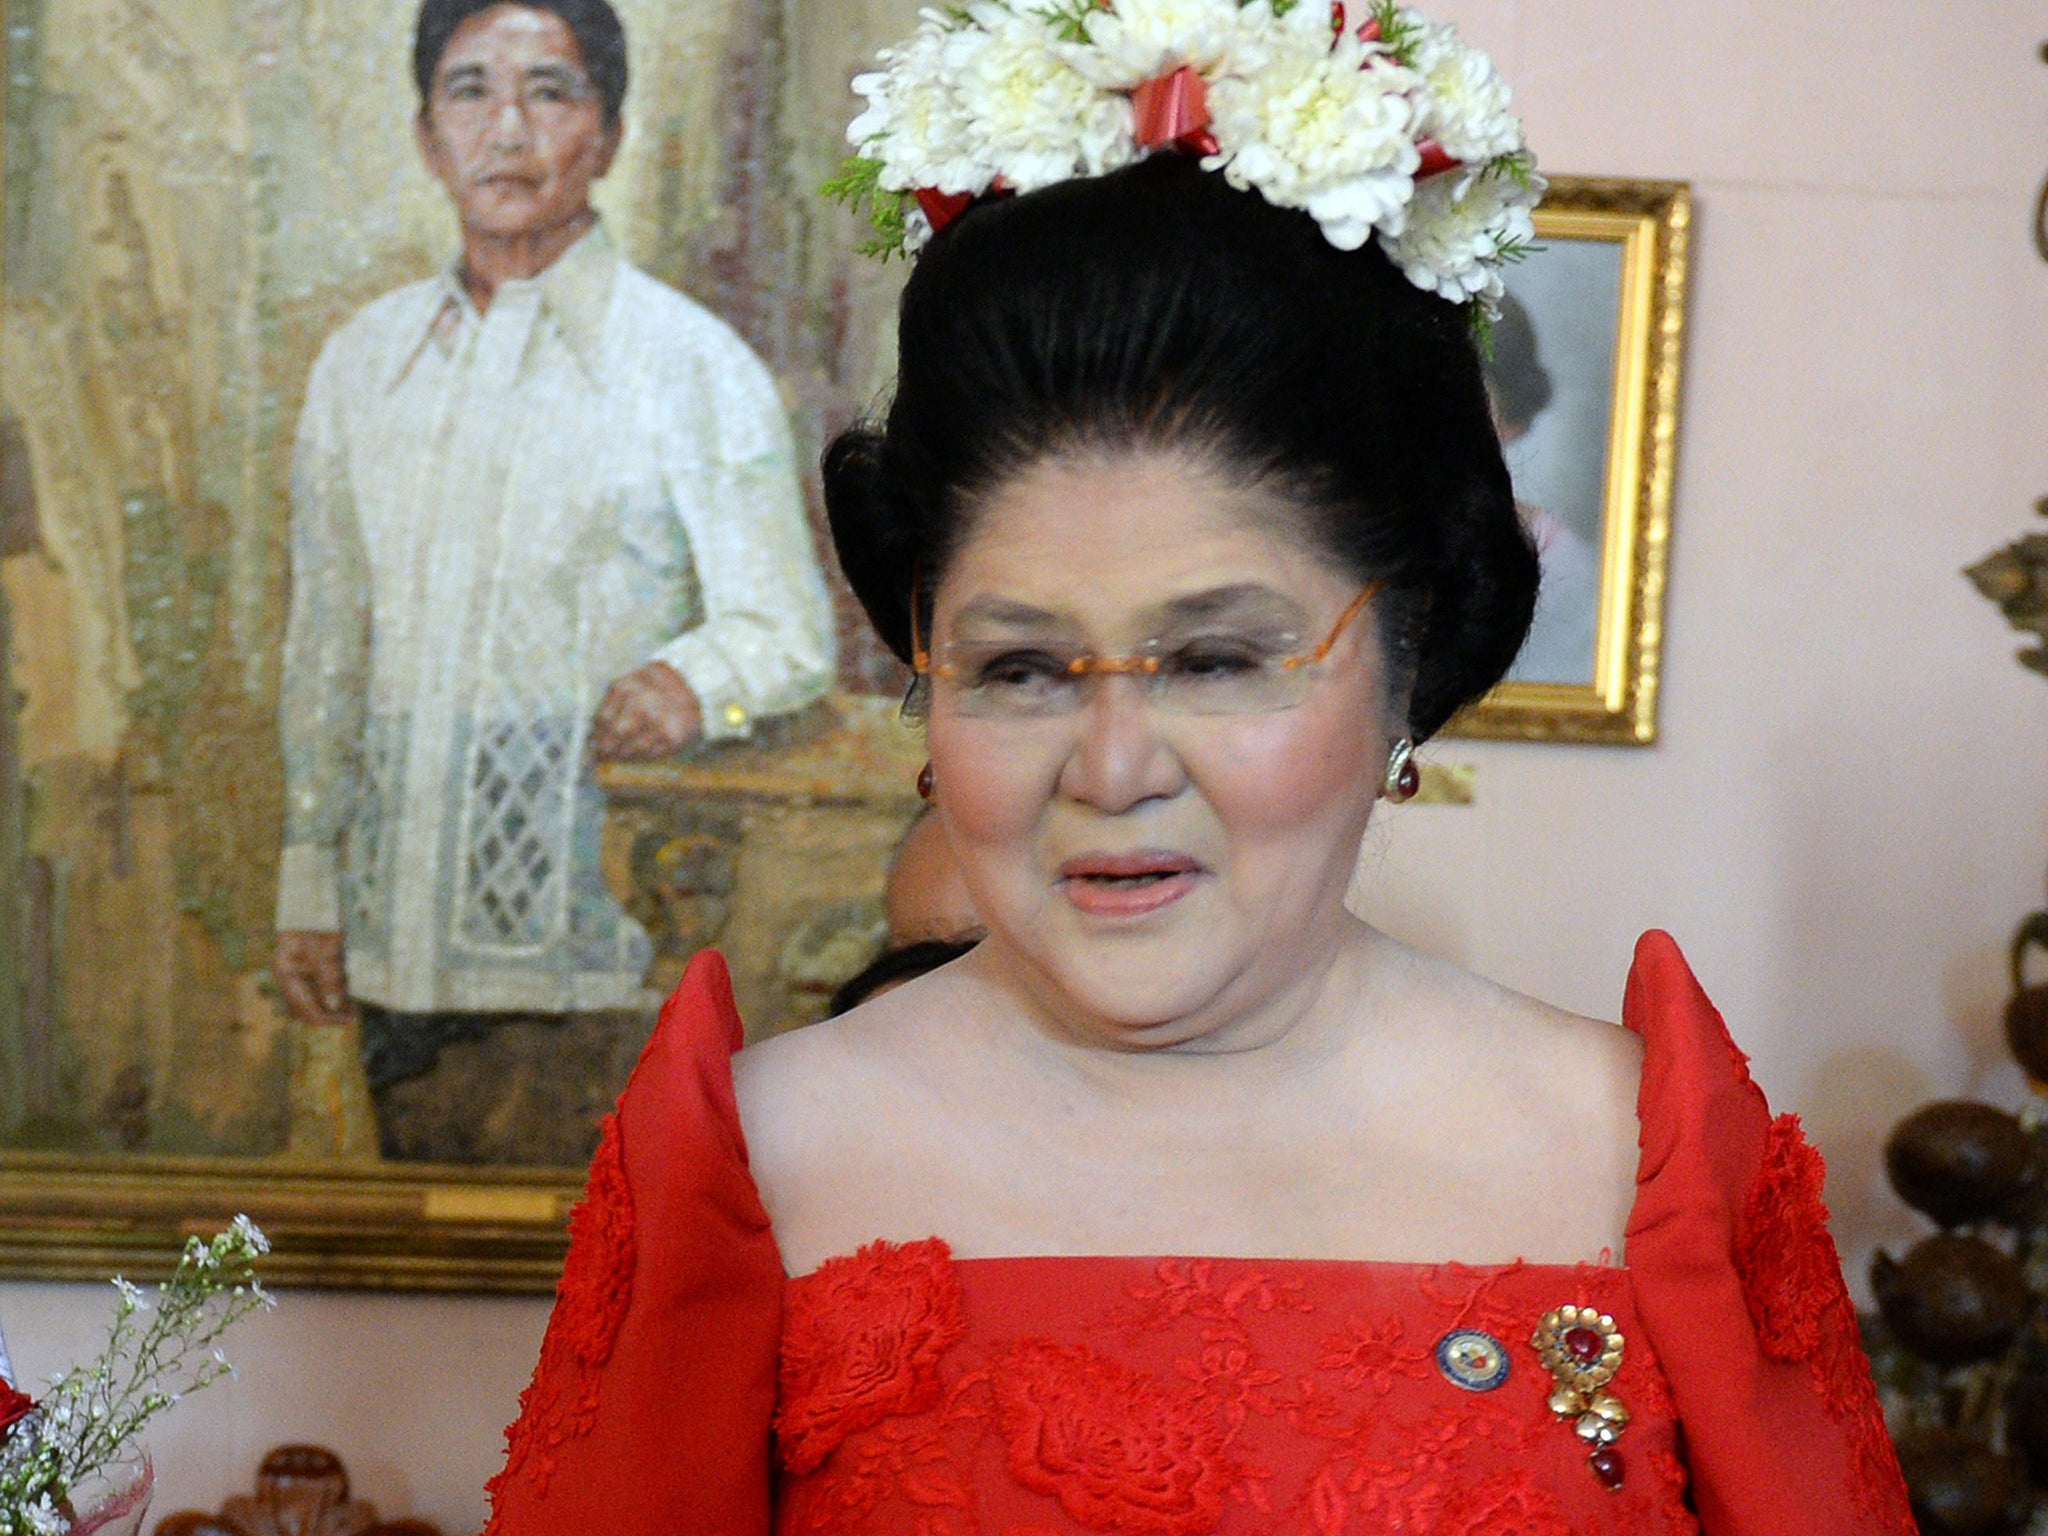 Khashoggi was accused, but then cleared over his dealings with dictator's widow Imelda Marcos